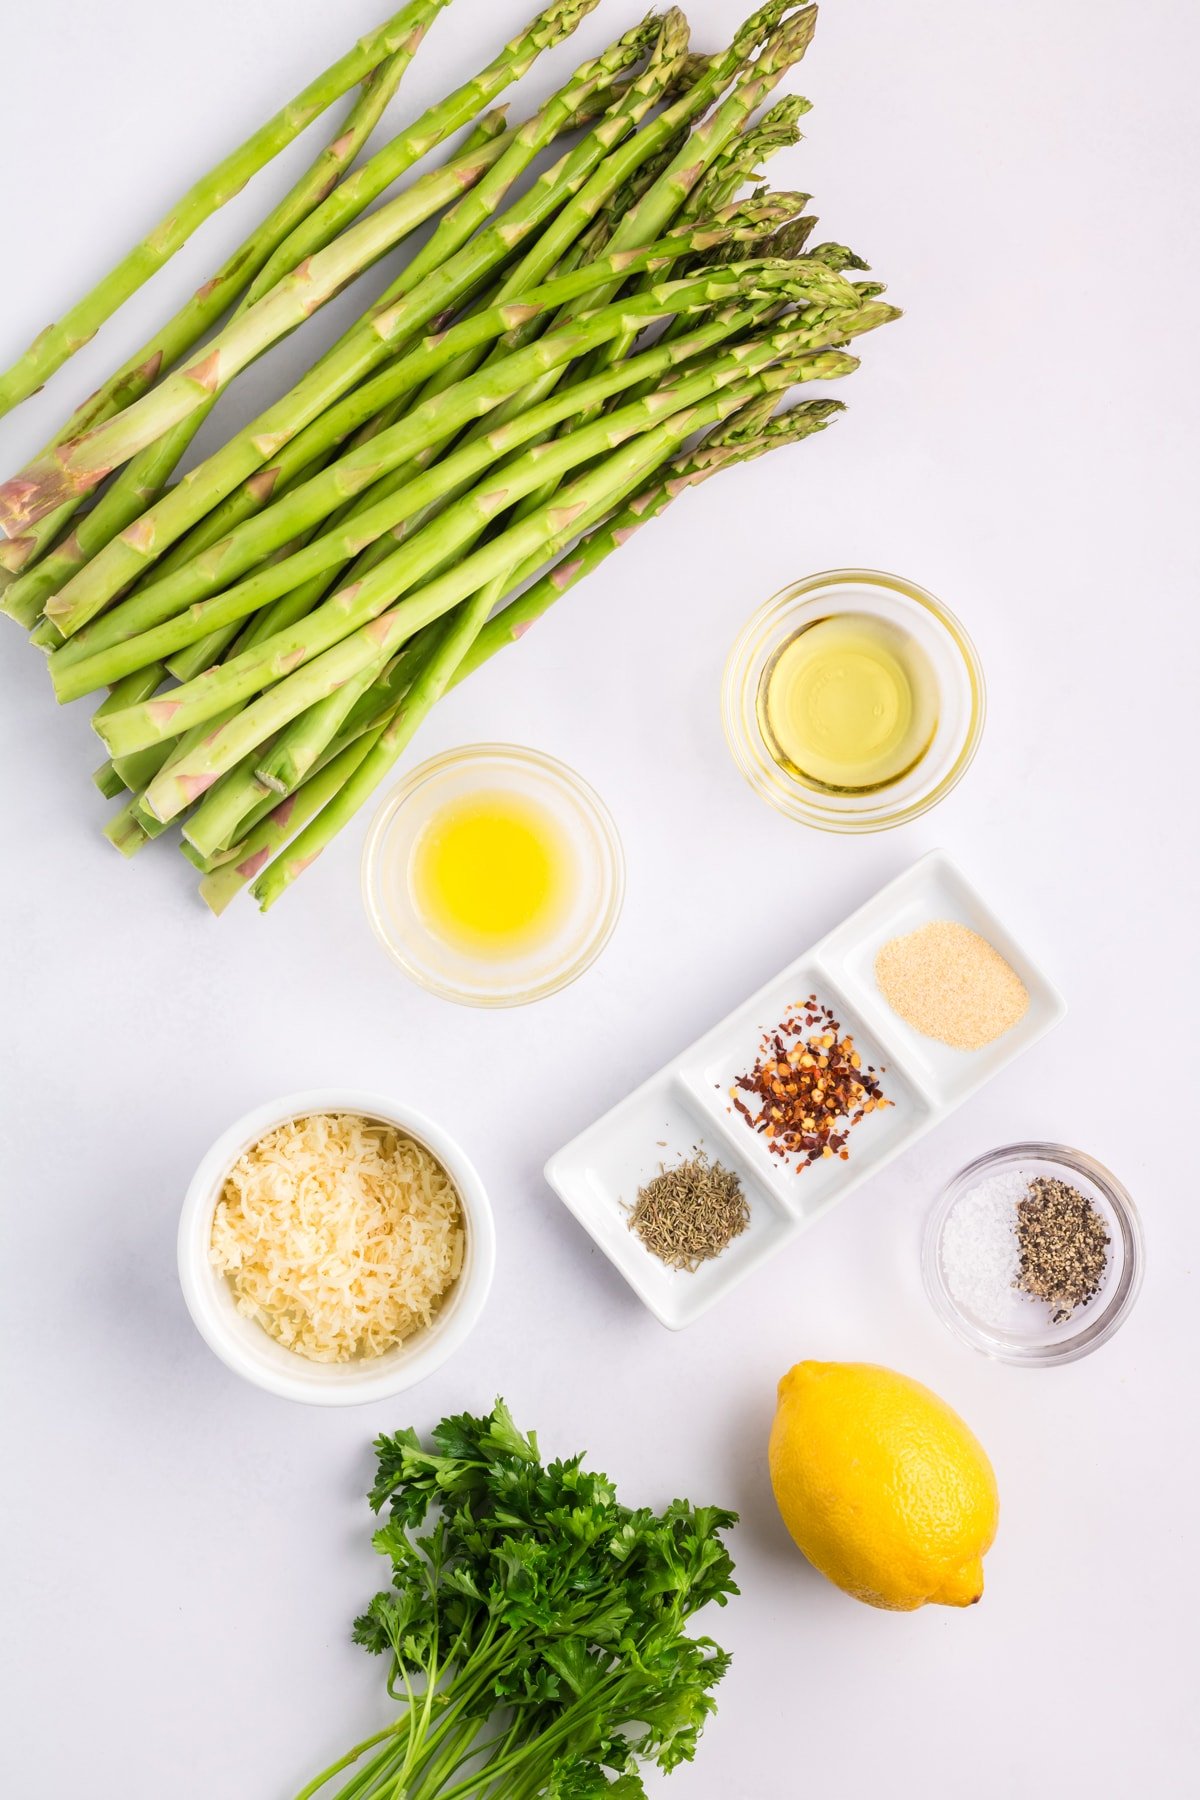 Overhead view of ingredients needed to make oven roasted asparagus